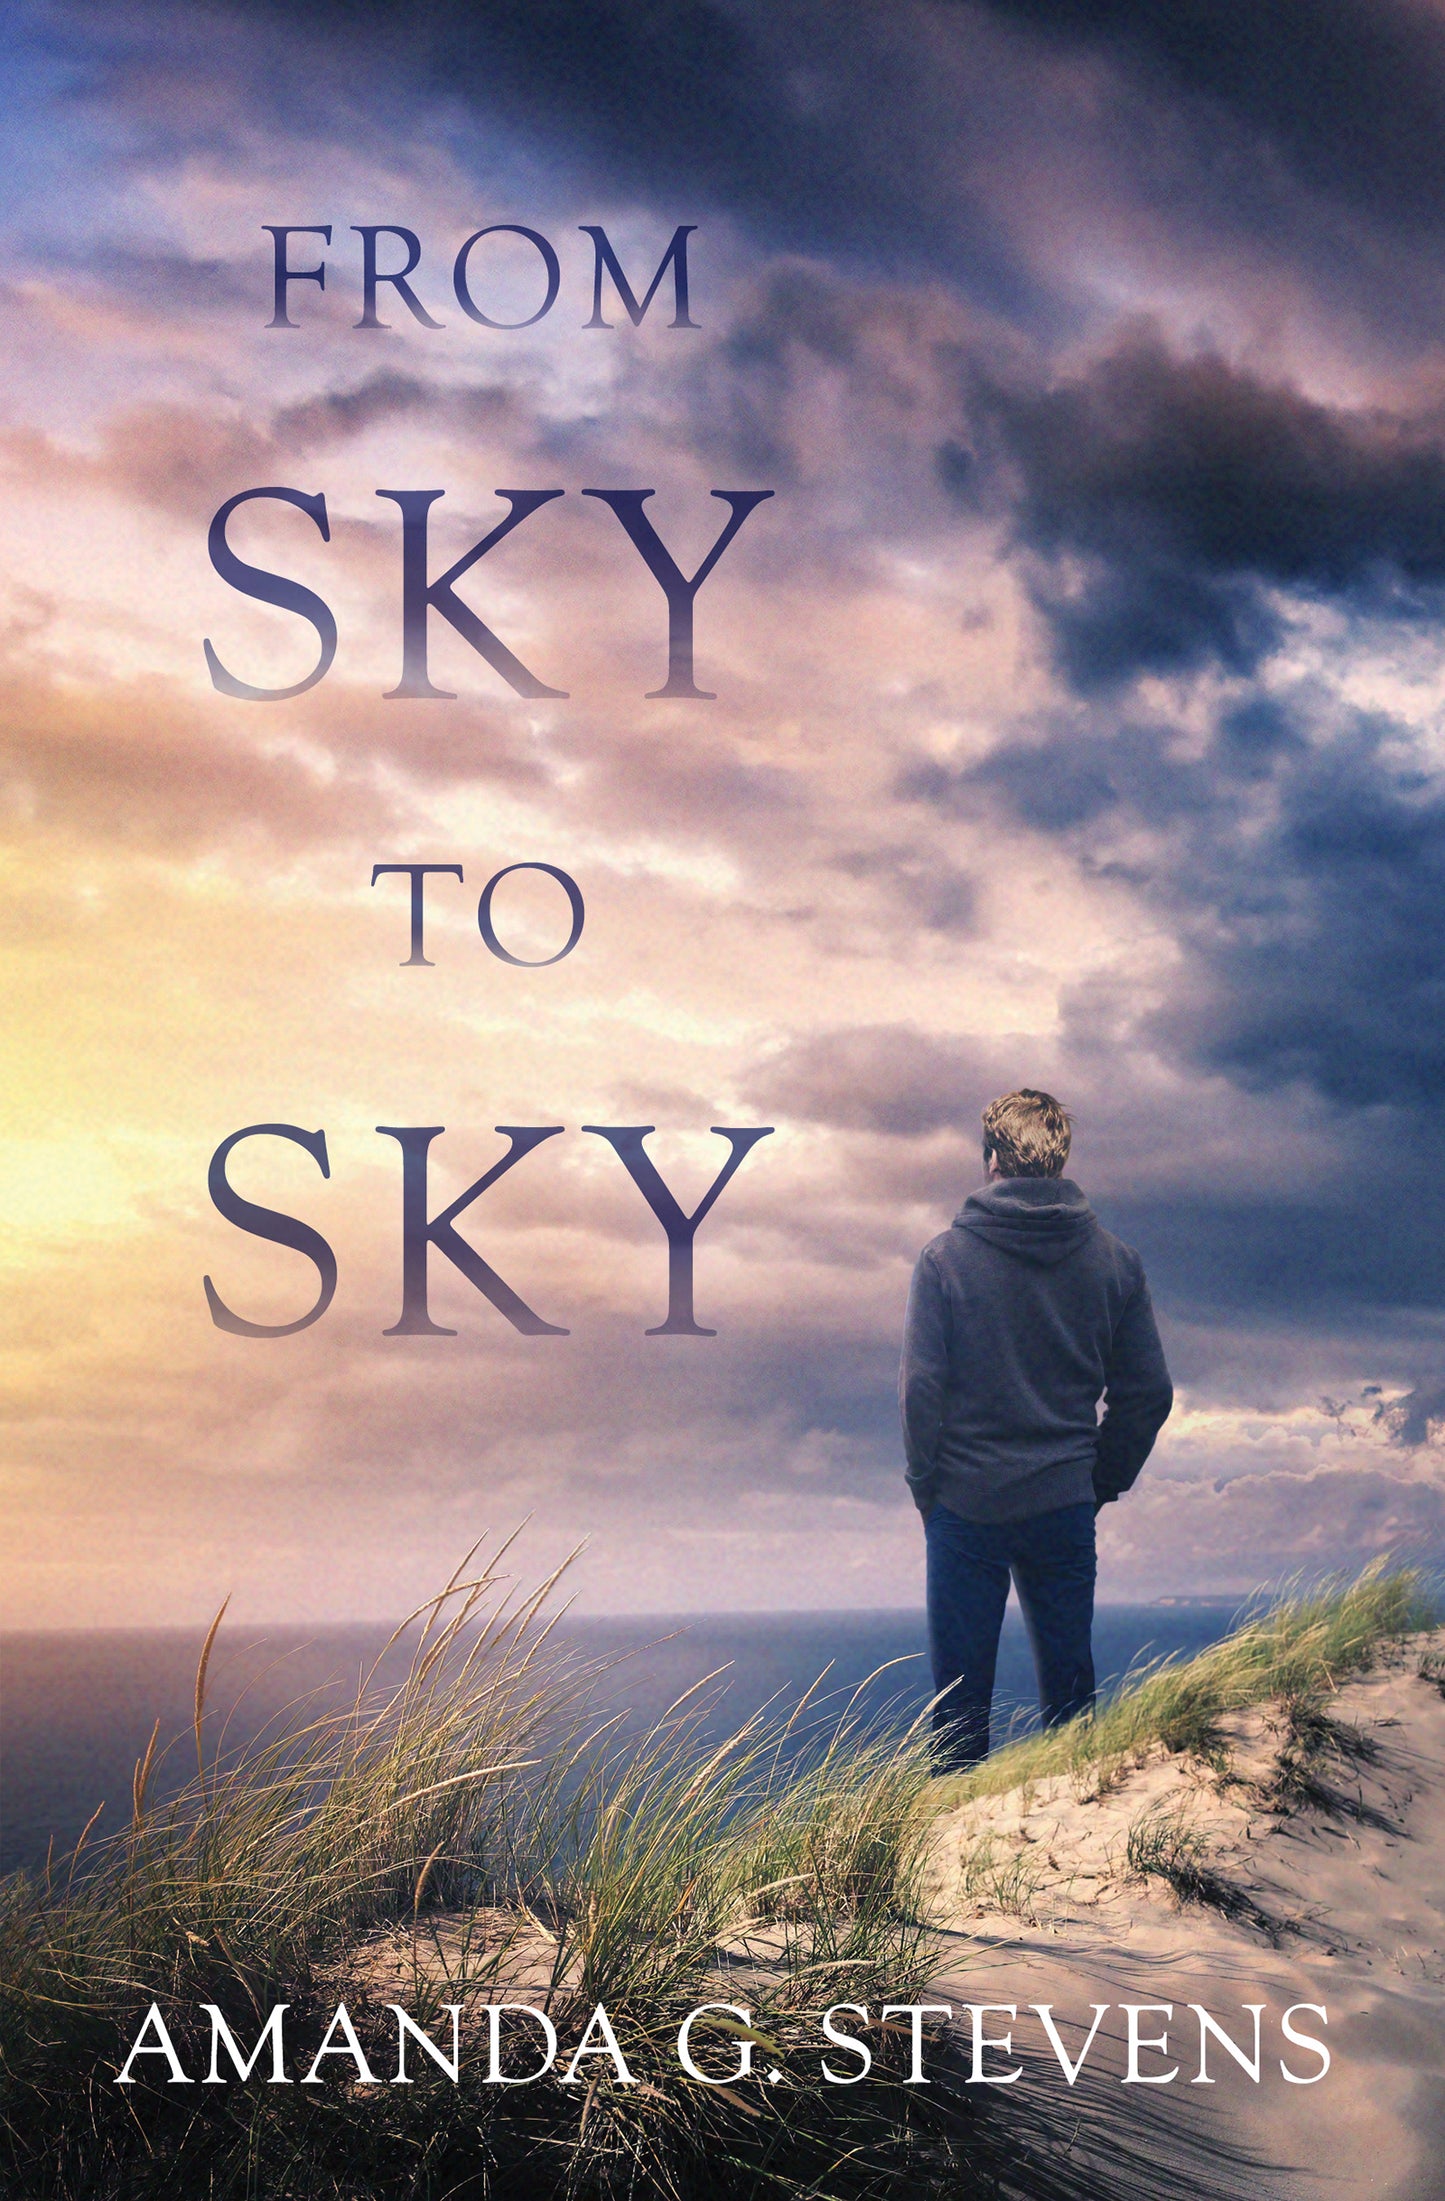 From Sky to Sky - The Christian Gift Company